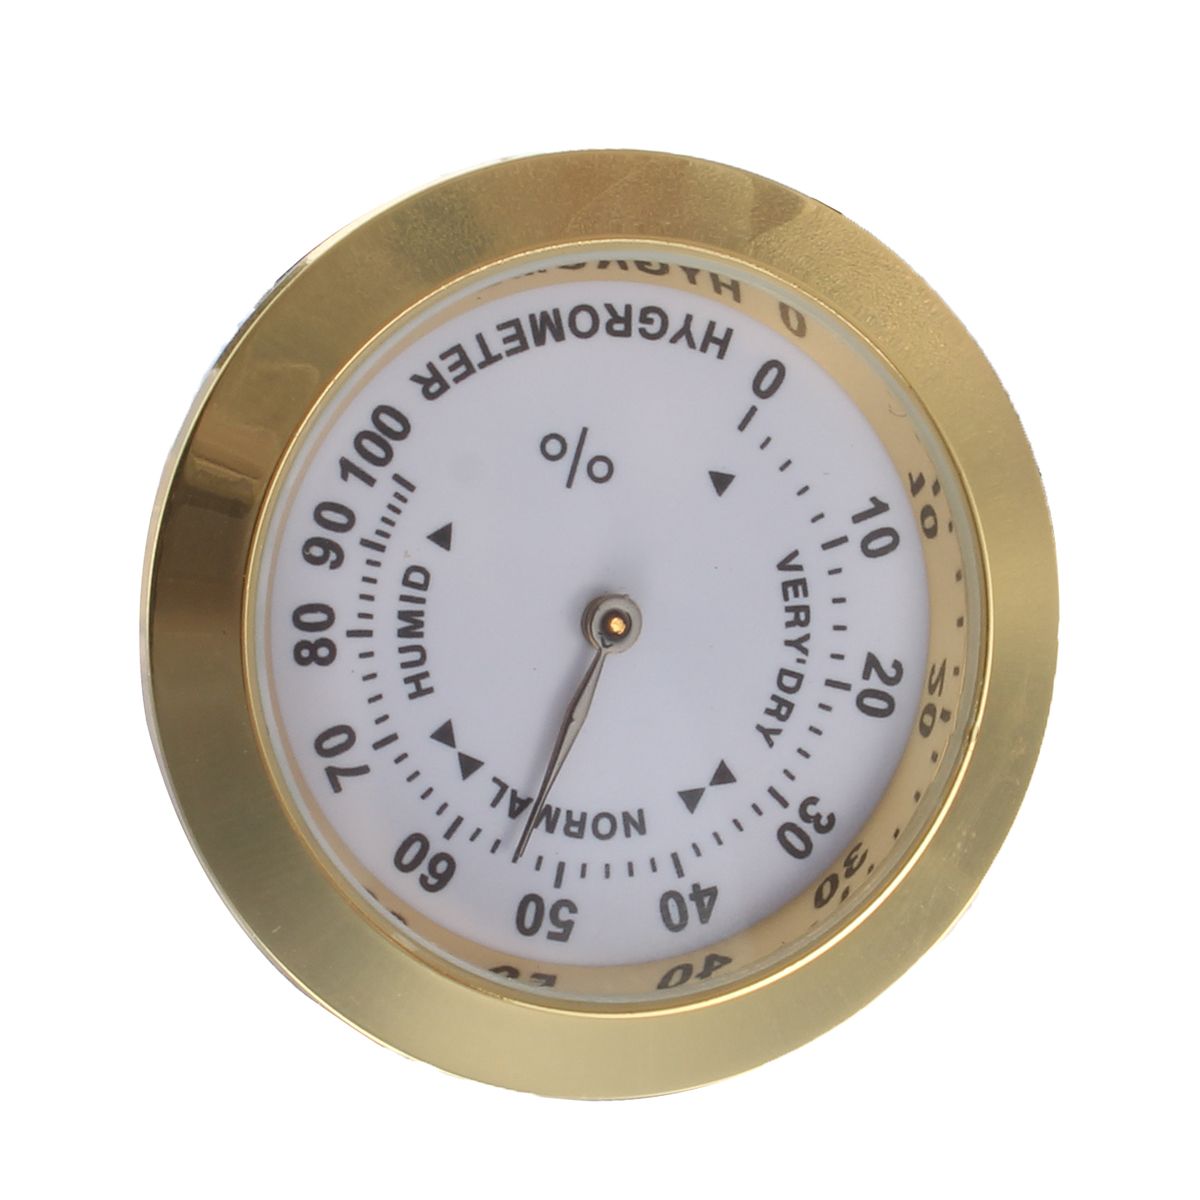 Analog-Hygrometer-Cigar-Humidity-Calibration-Gauge-With-Glass-Lens-for-Humidors-1368440